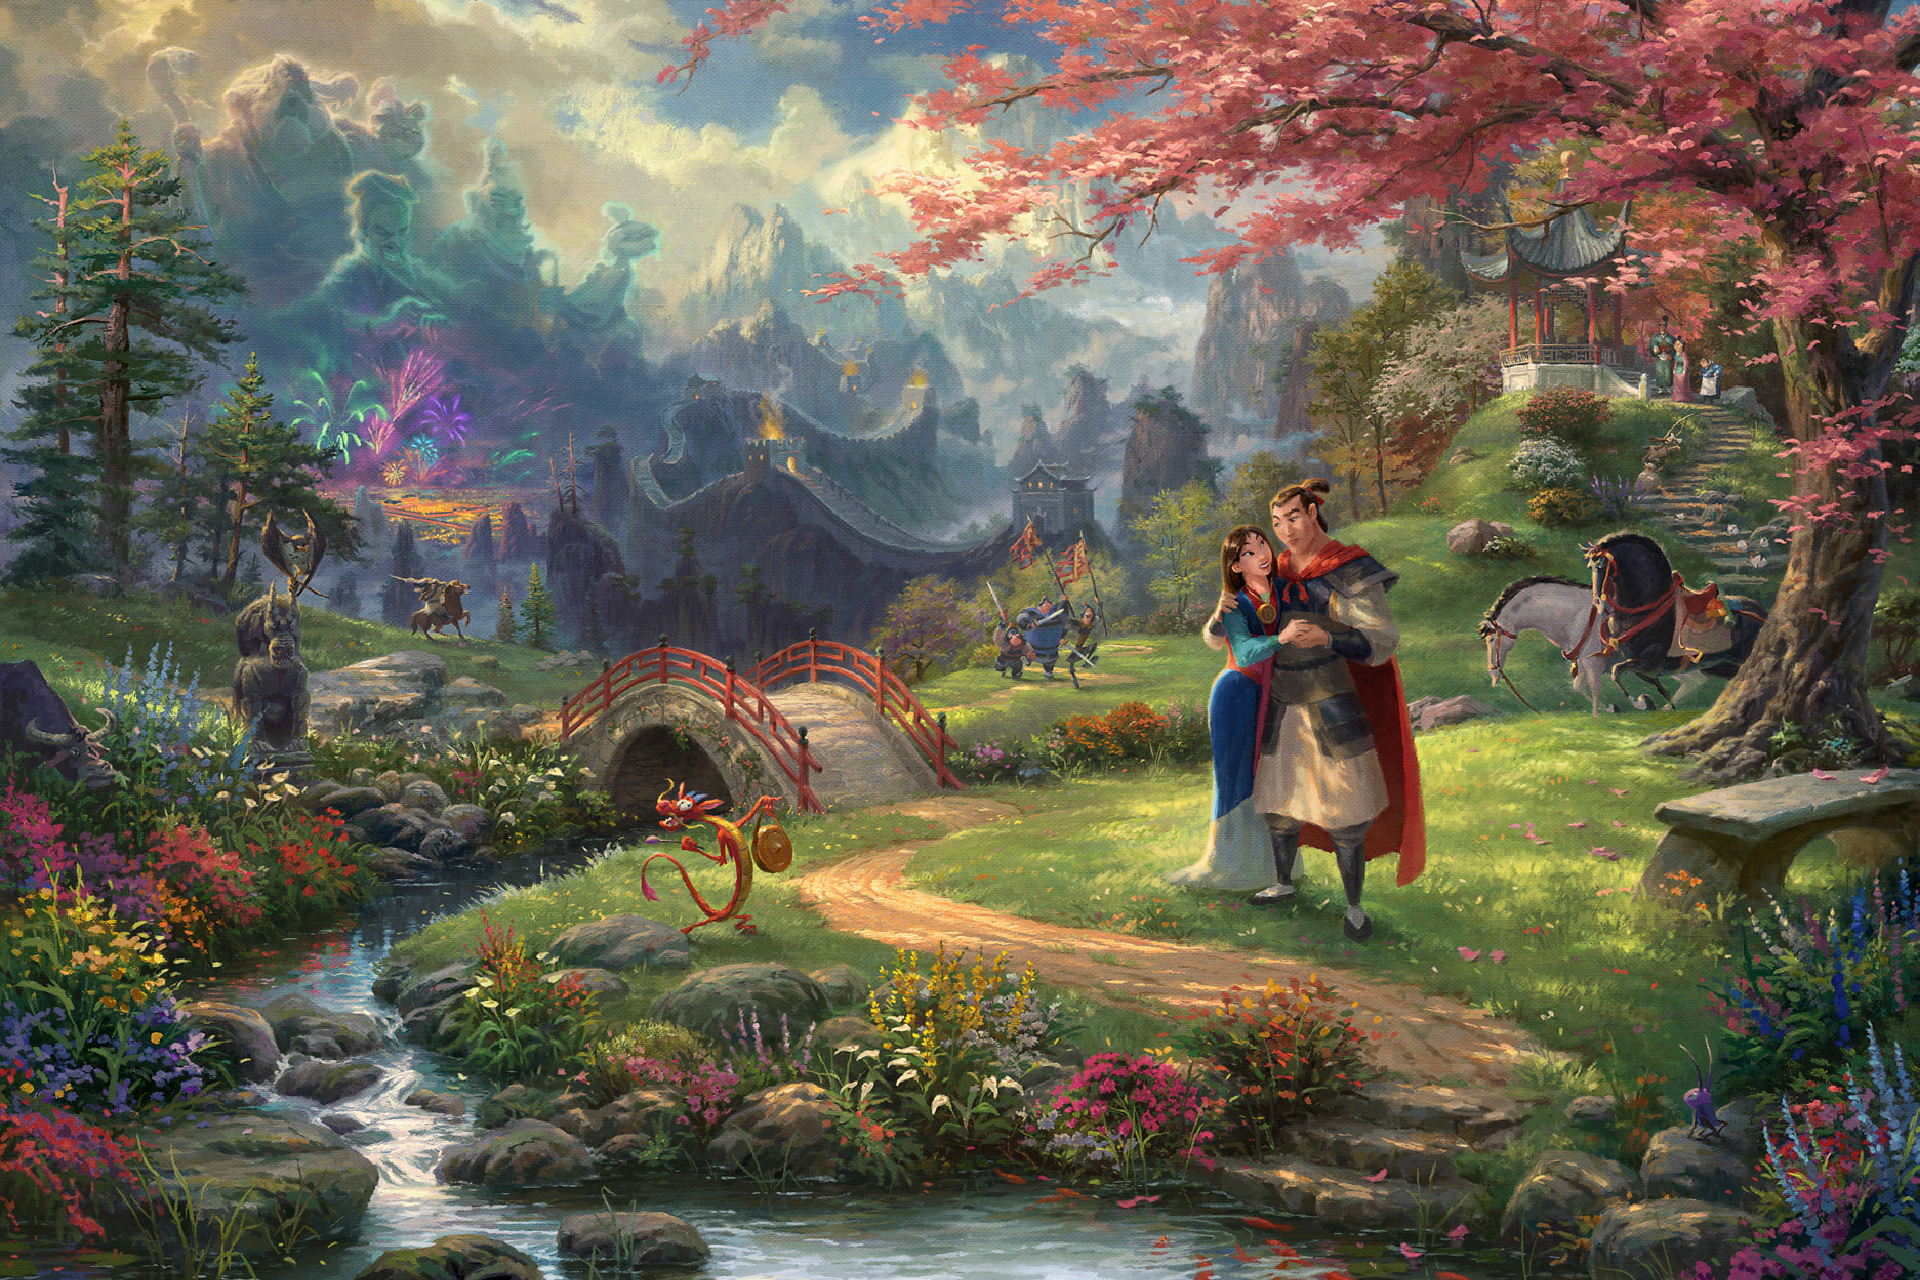 After the War by Thomas Kinkade